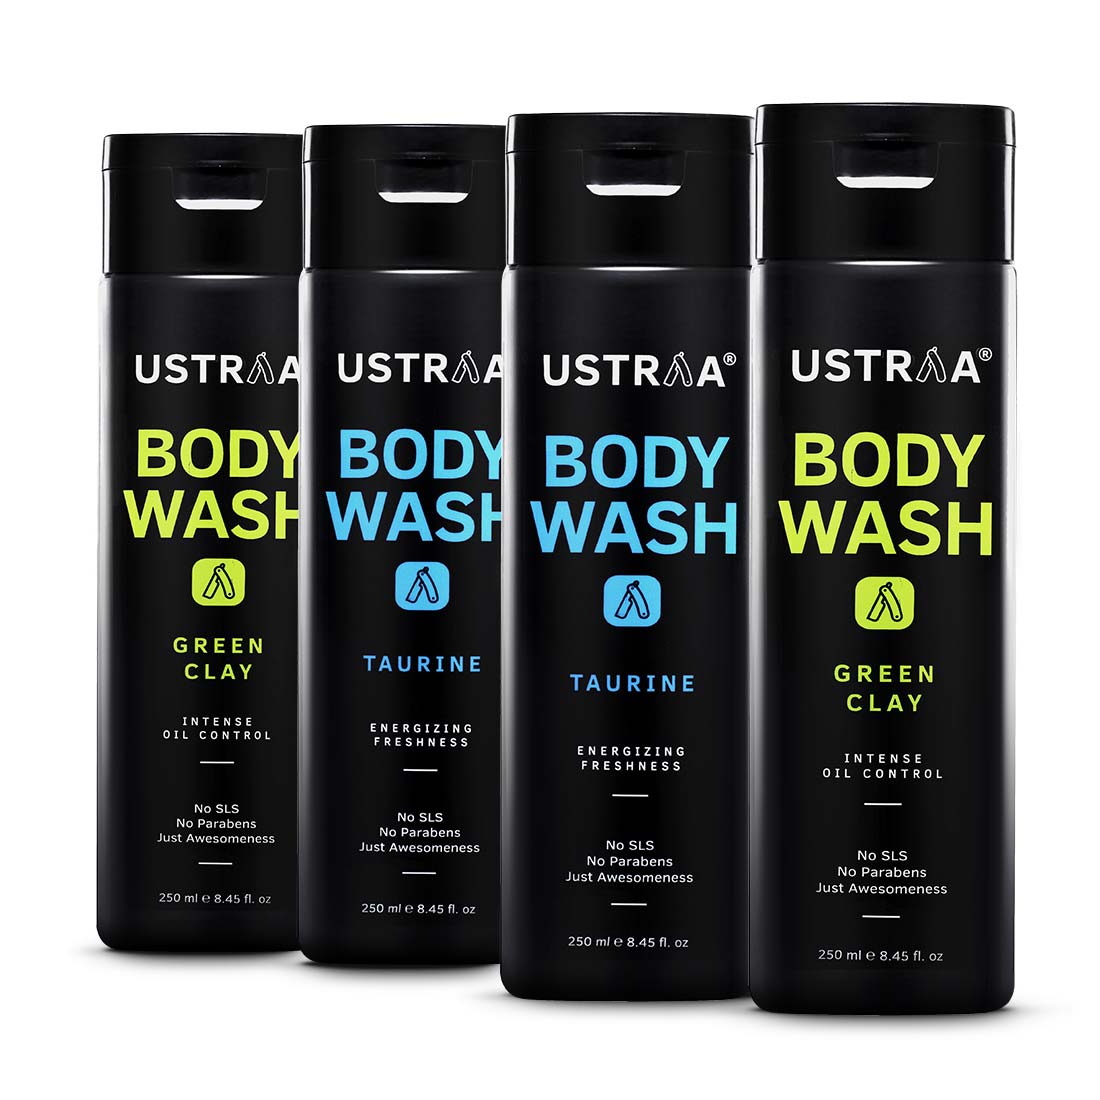 Body Wash for Men - Green Clay & Taurine - Set of 4